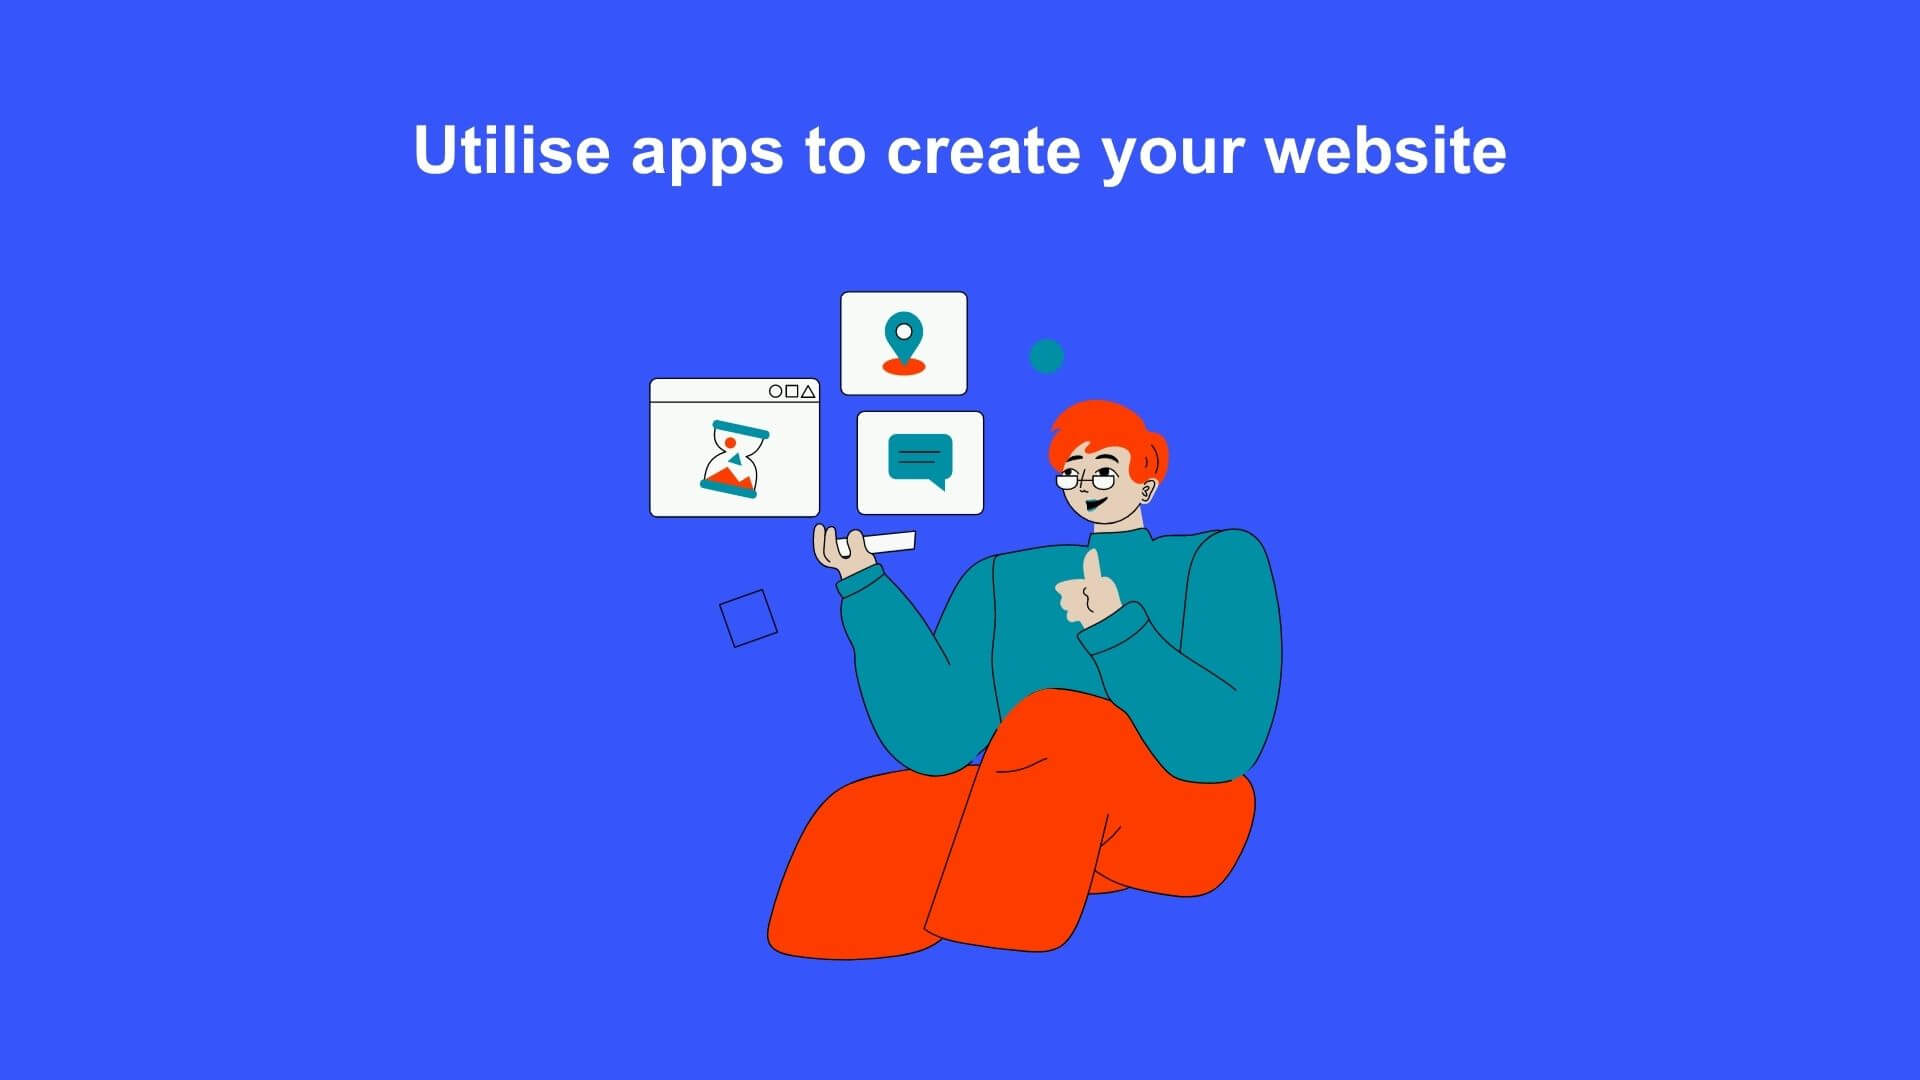 Utilise apps to create your website